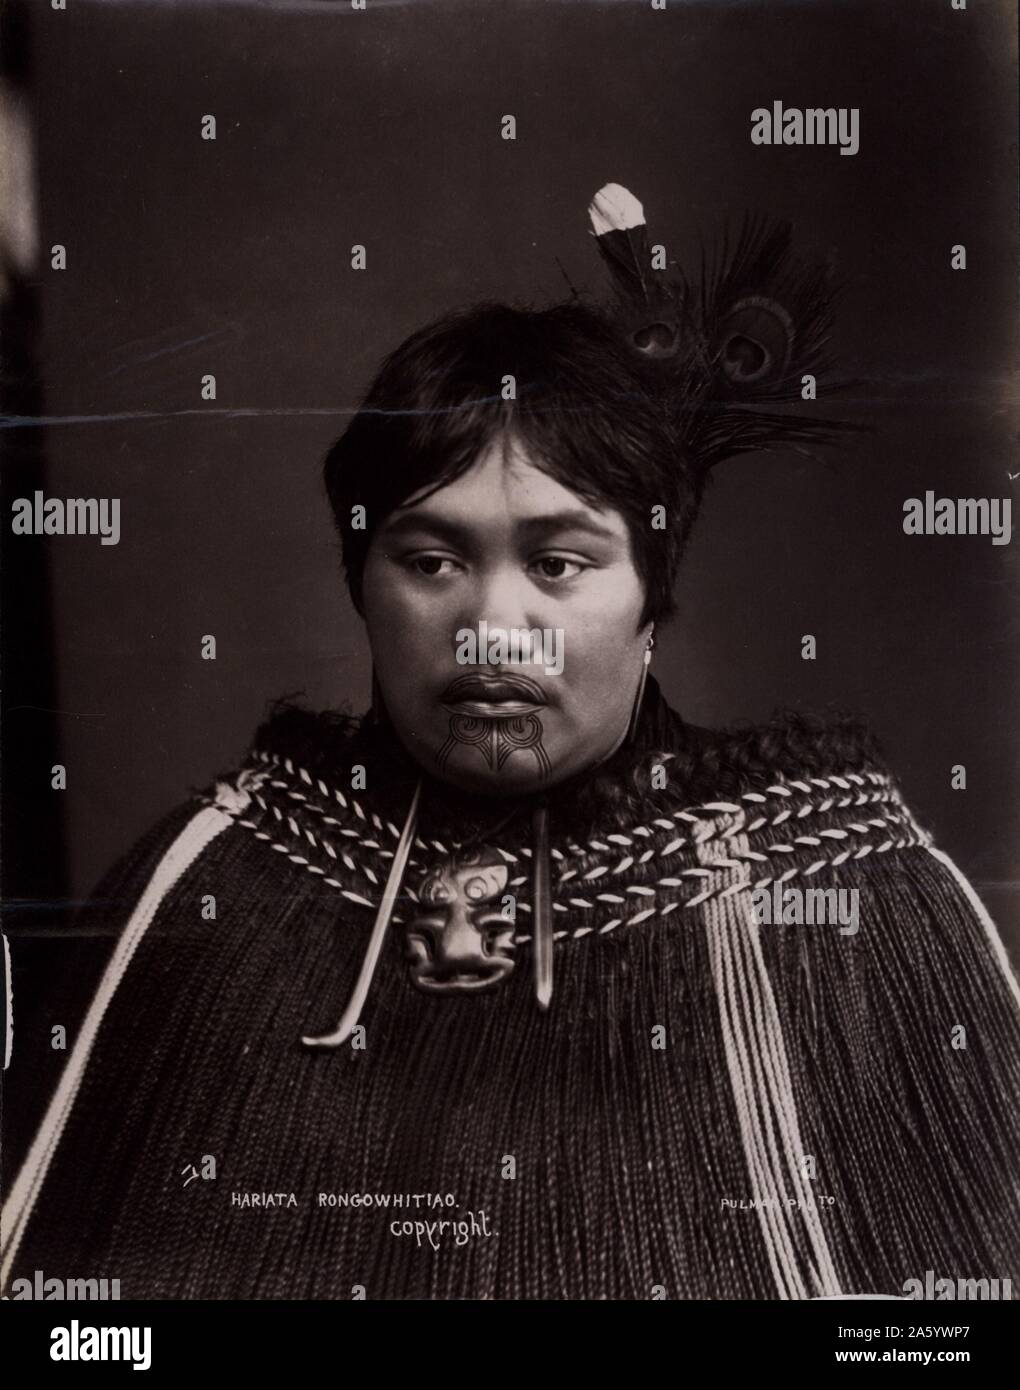 Hariata Rongowhitiao (Maori chief with face tattoos) photograophed in New Zealnd 1881 Stock Photo